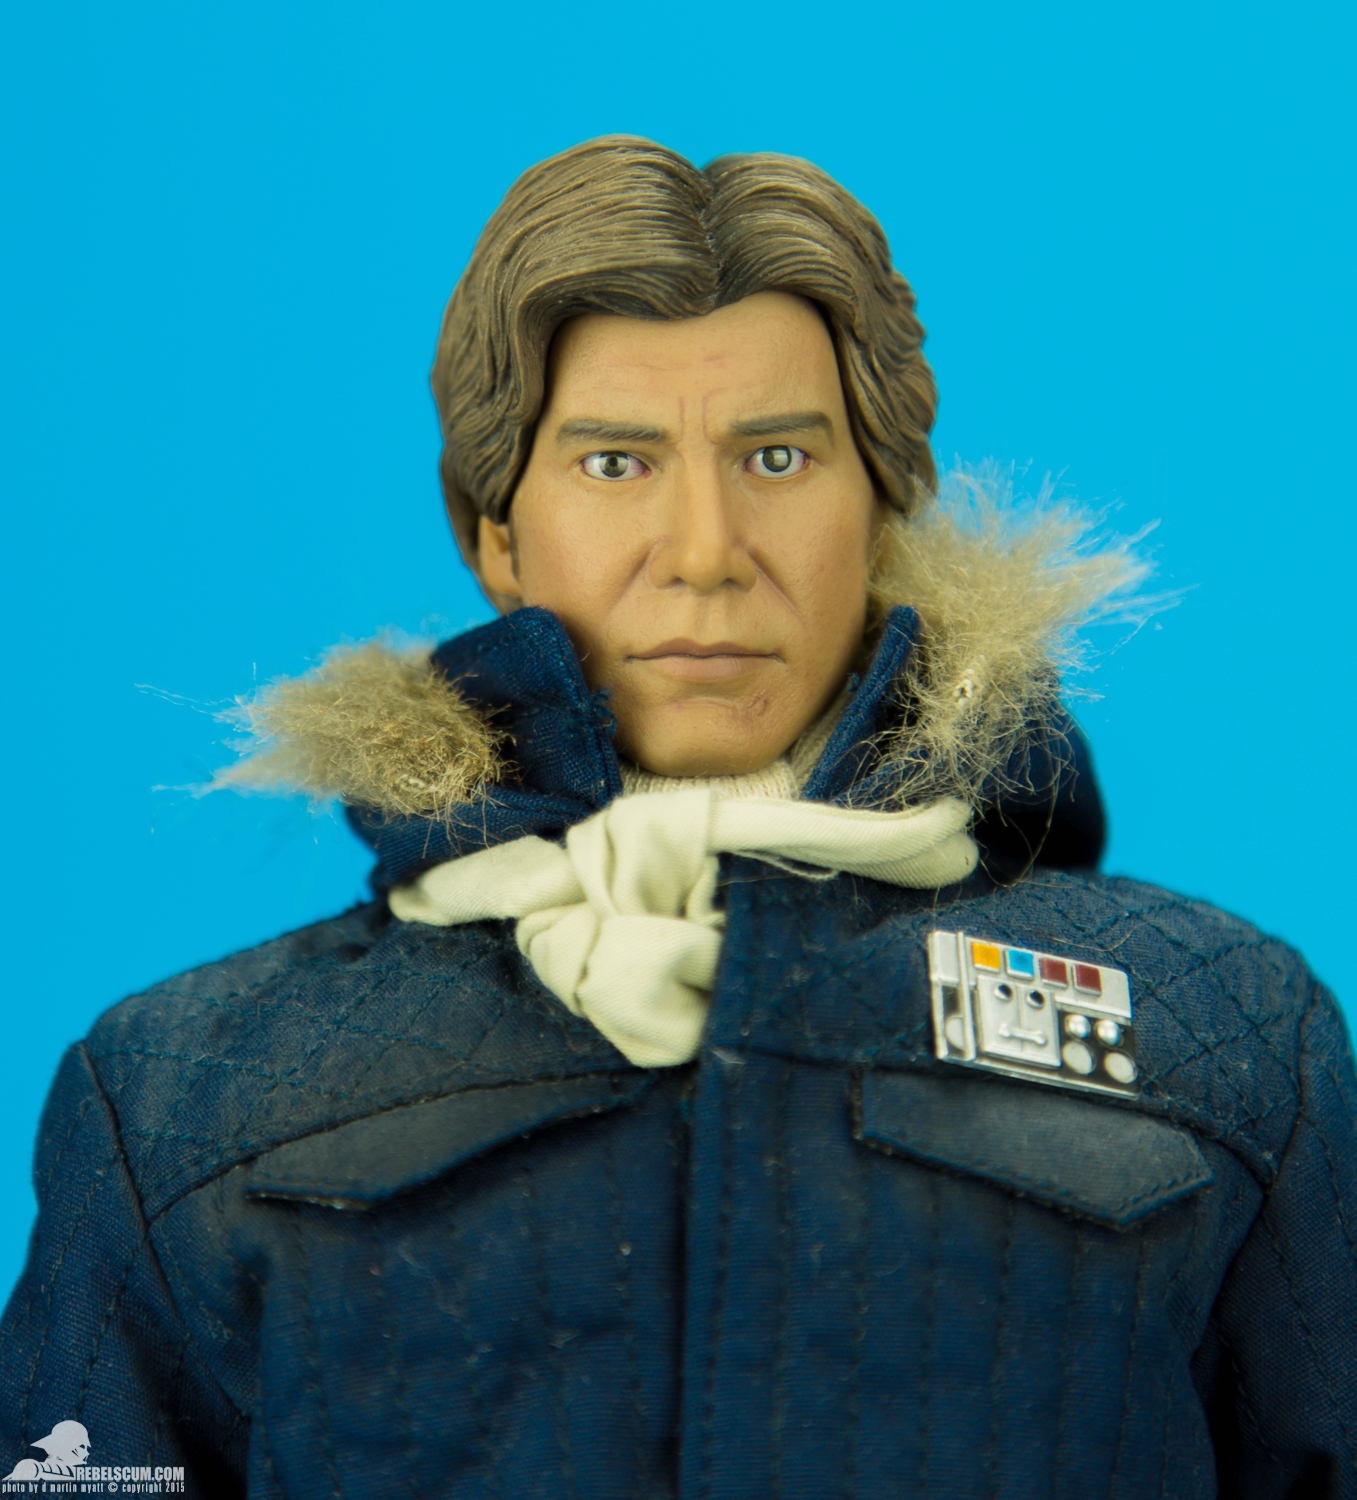 Han-Solo-Hoth-Blue-Sixth-Scale-Sideshow-Collectibles-Star-Wars-009.jpg